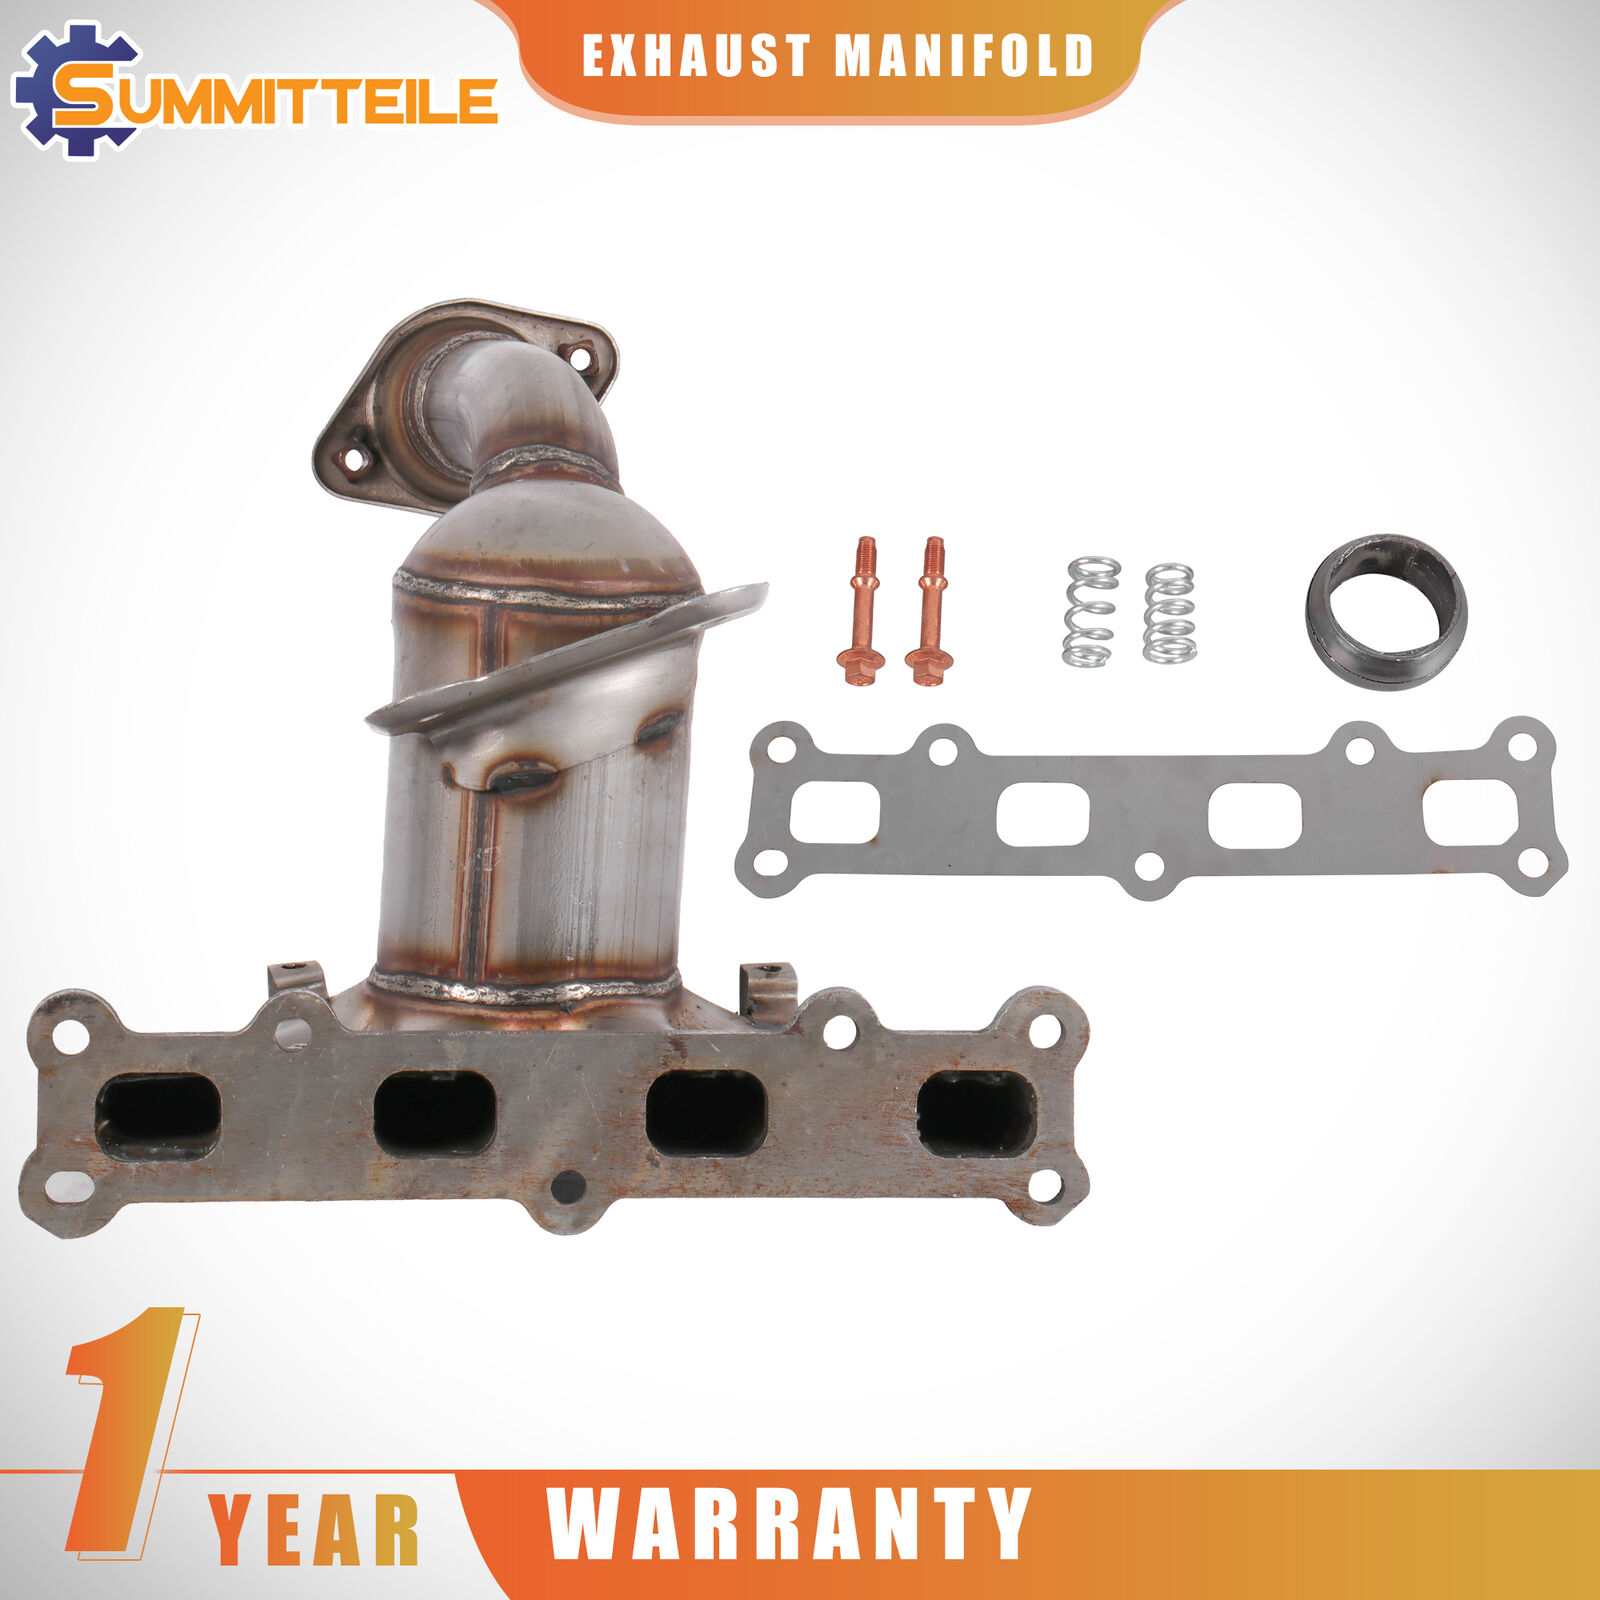 Catalytic Converter Exhaust Manifold For Jeep Compass Patriot Dodge Caliber 2.4L